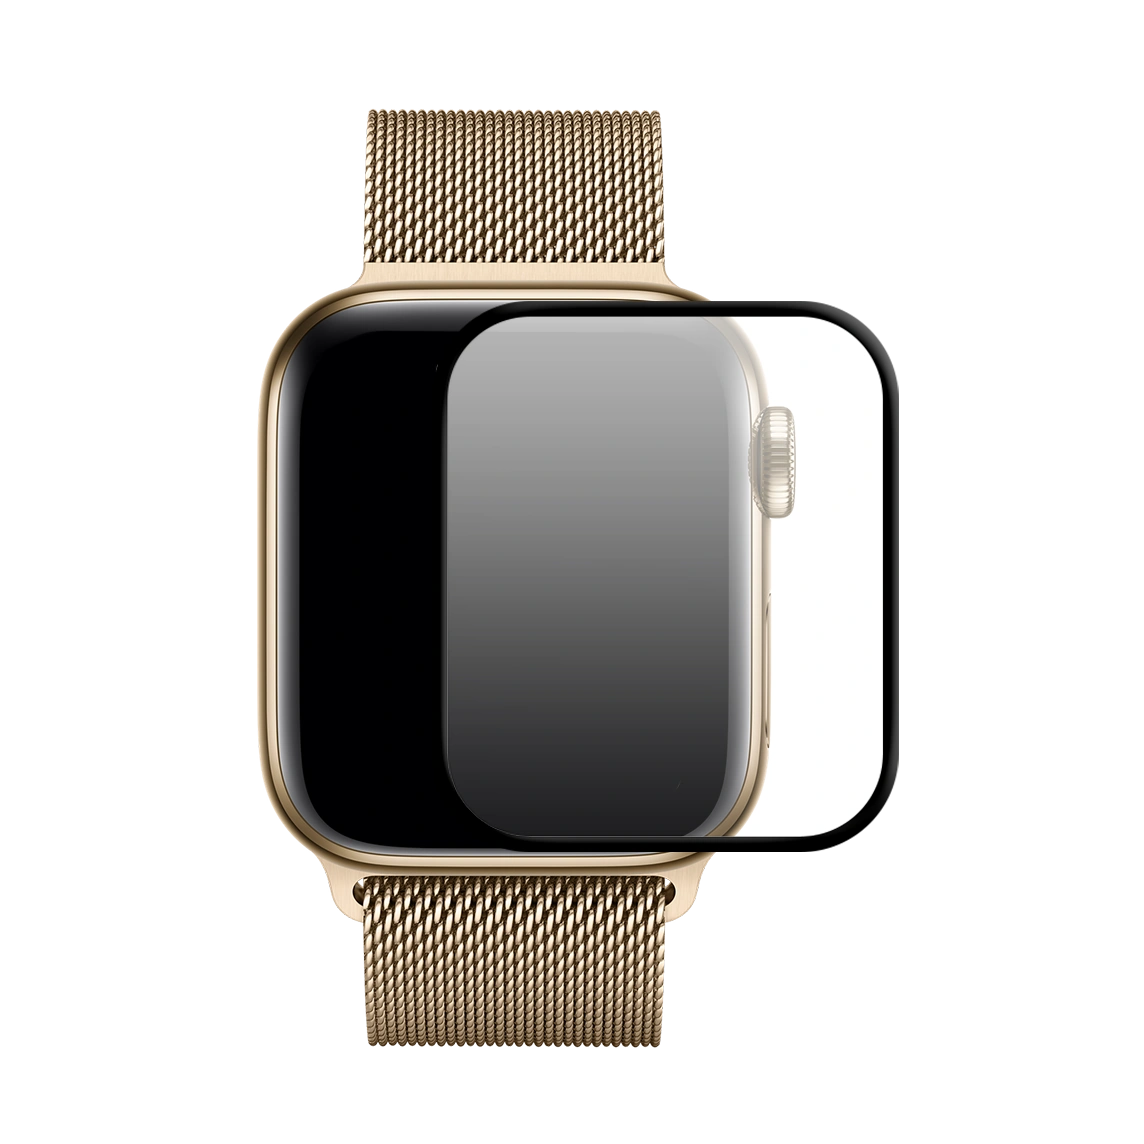 Apple Watch Series 8 Gold Stainless Steel Case with Milanese Loop